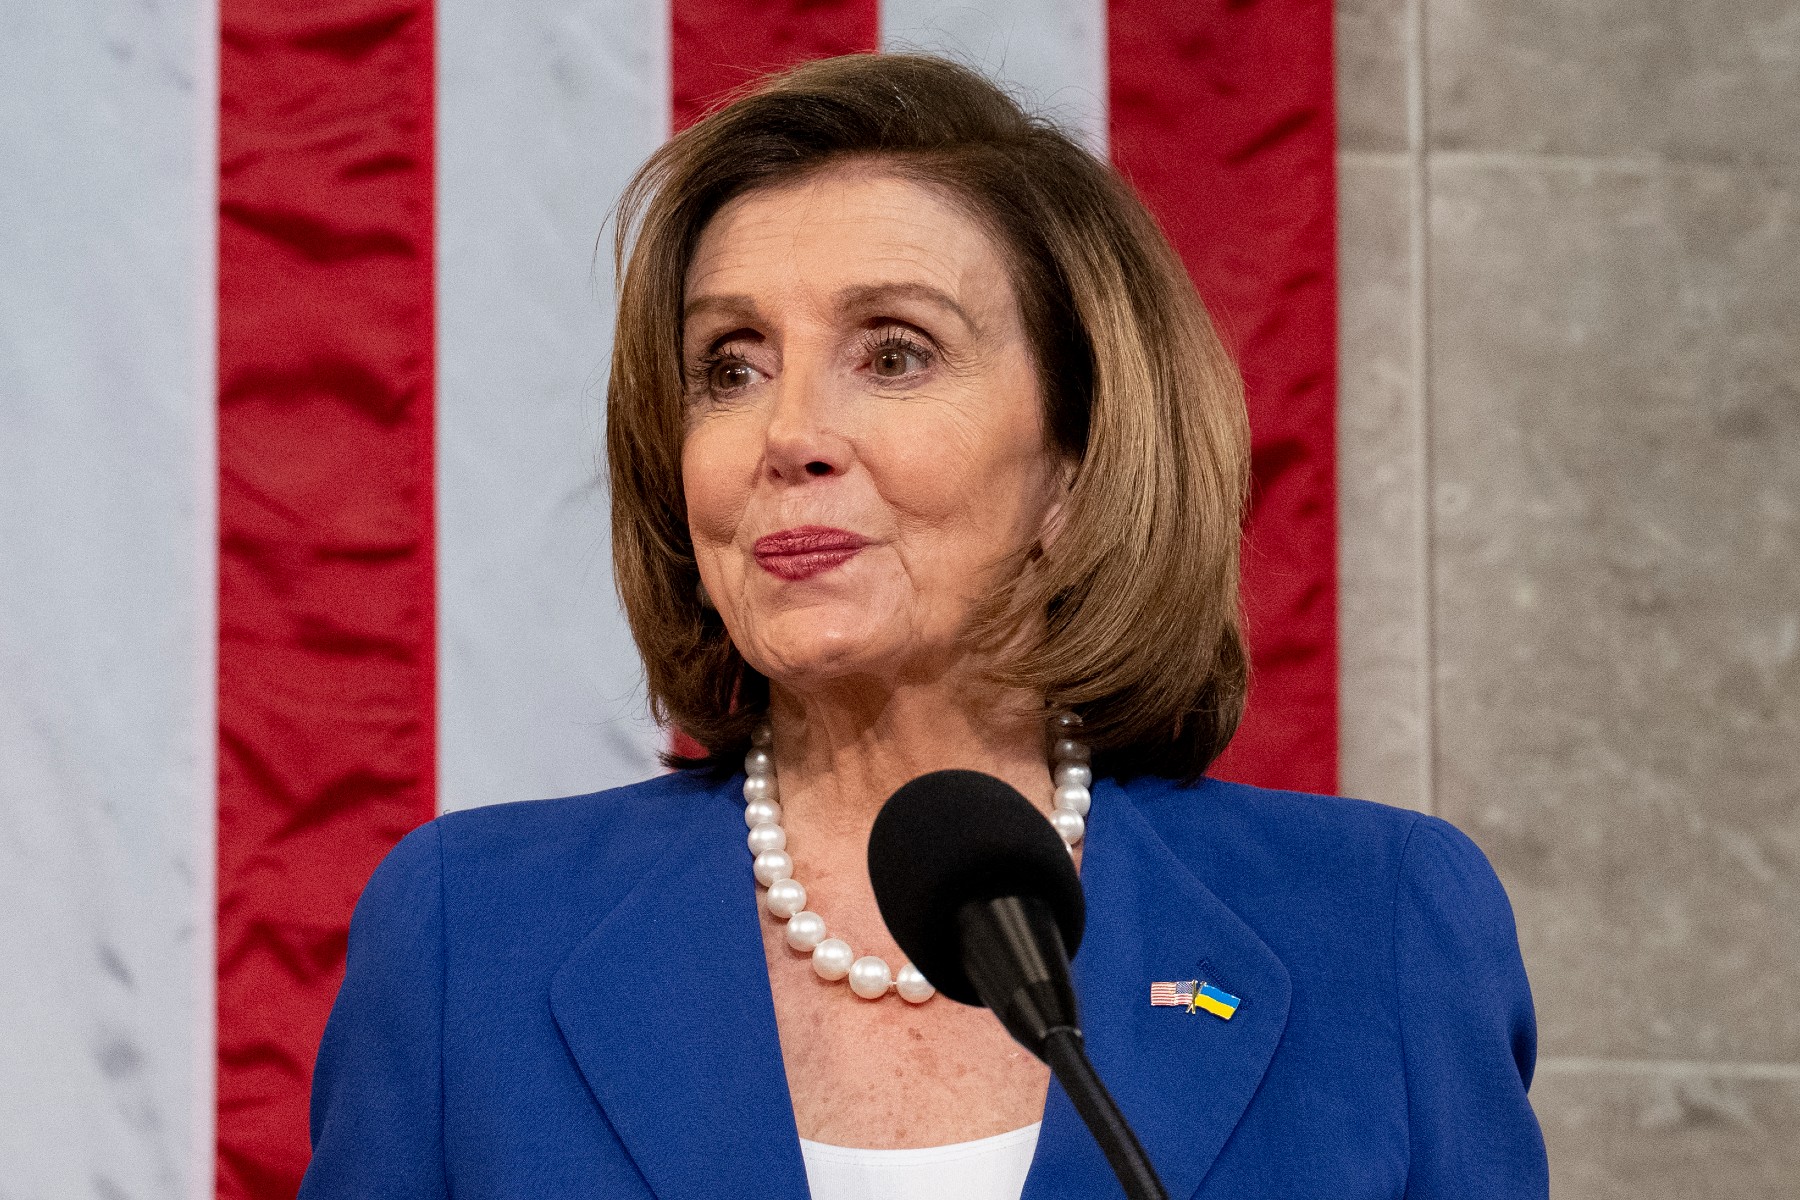 Video of Nancy Pelosi's Gestures During State of the Union Viewed 1.5M